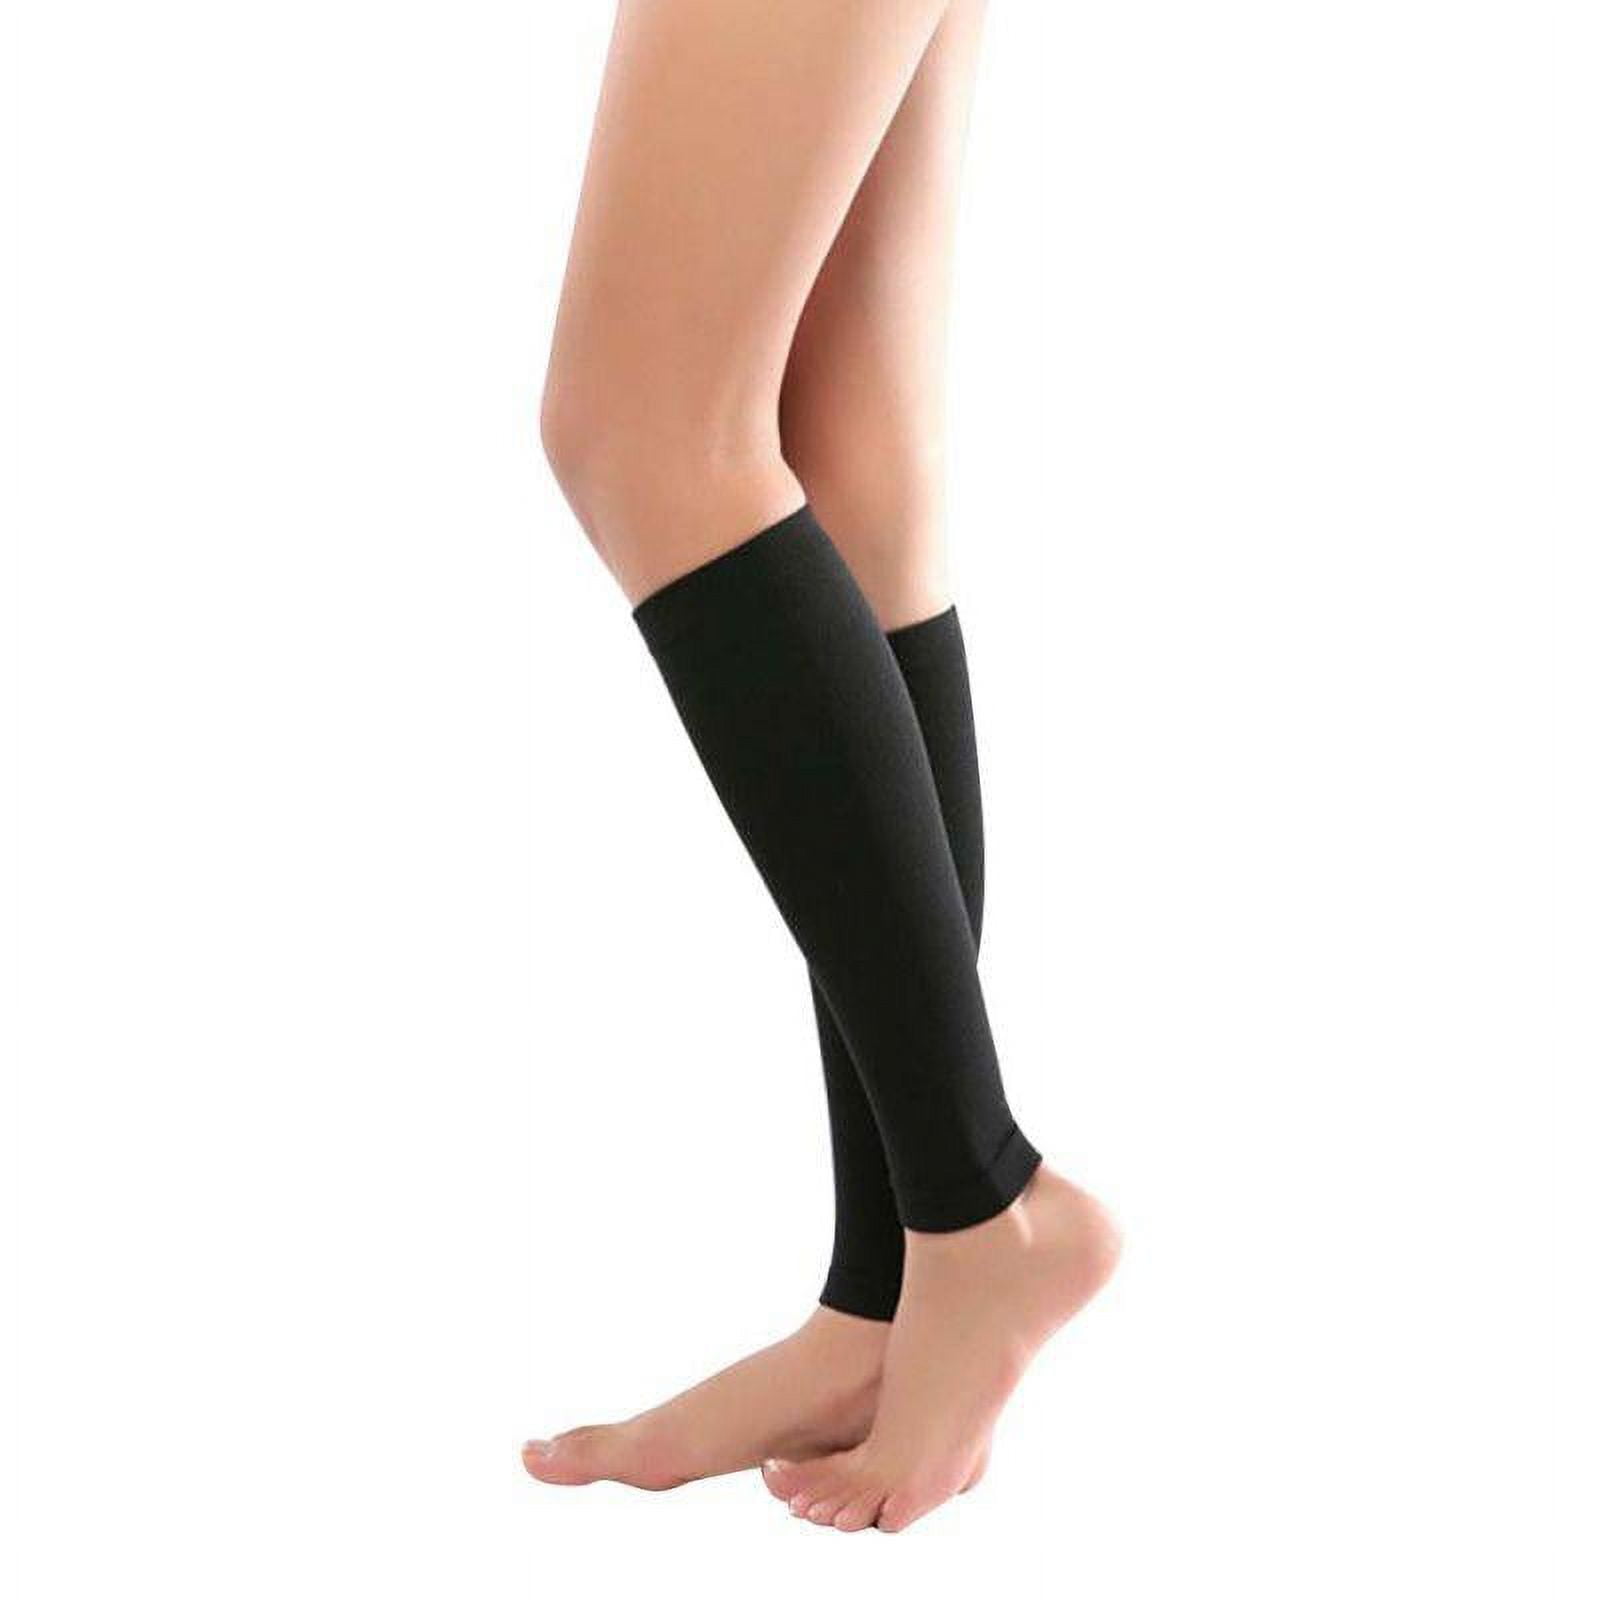 Calf Compression Sleeve Women, 1 Pair Calf Support Footless Compression  Socks Stockings for Shin Splints, Varicose Veins, Relieve Recovery, Black 